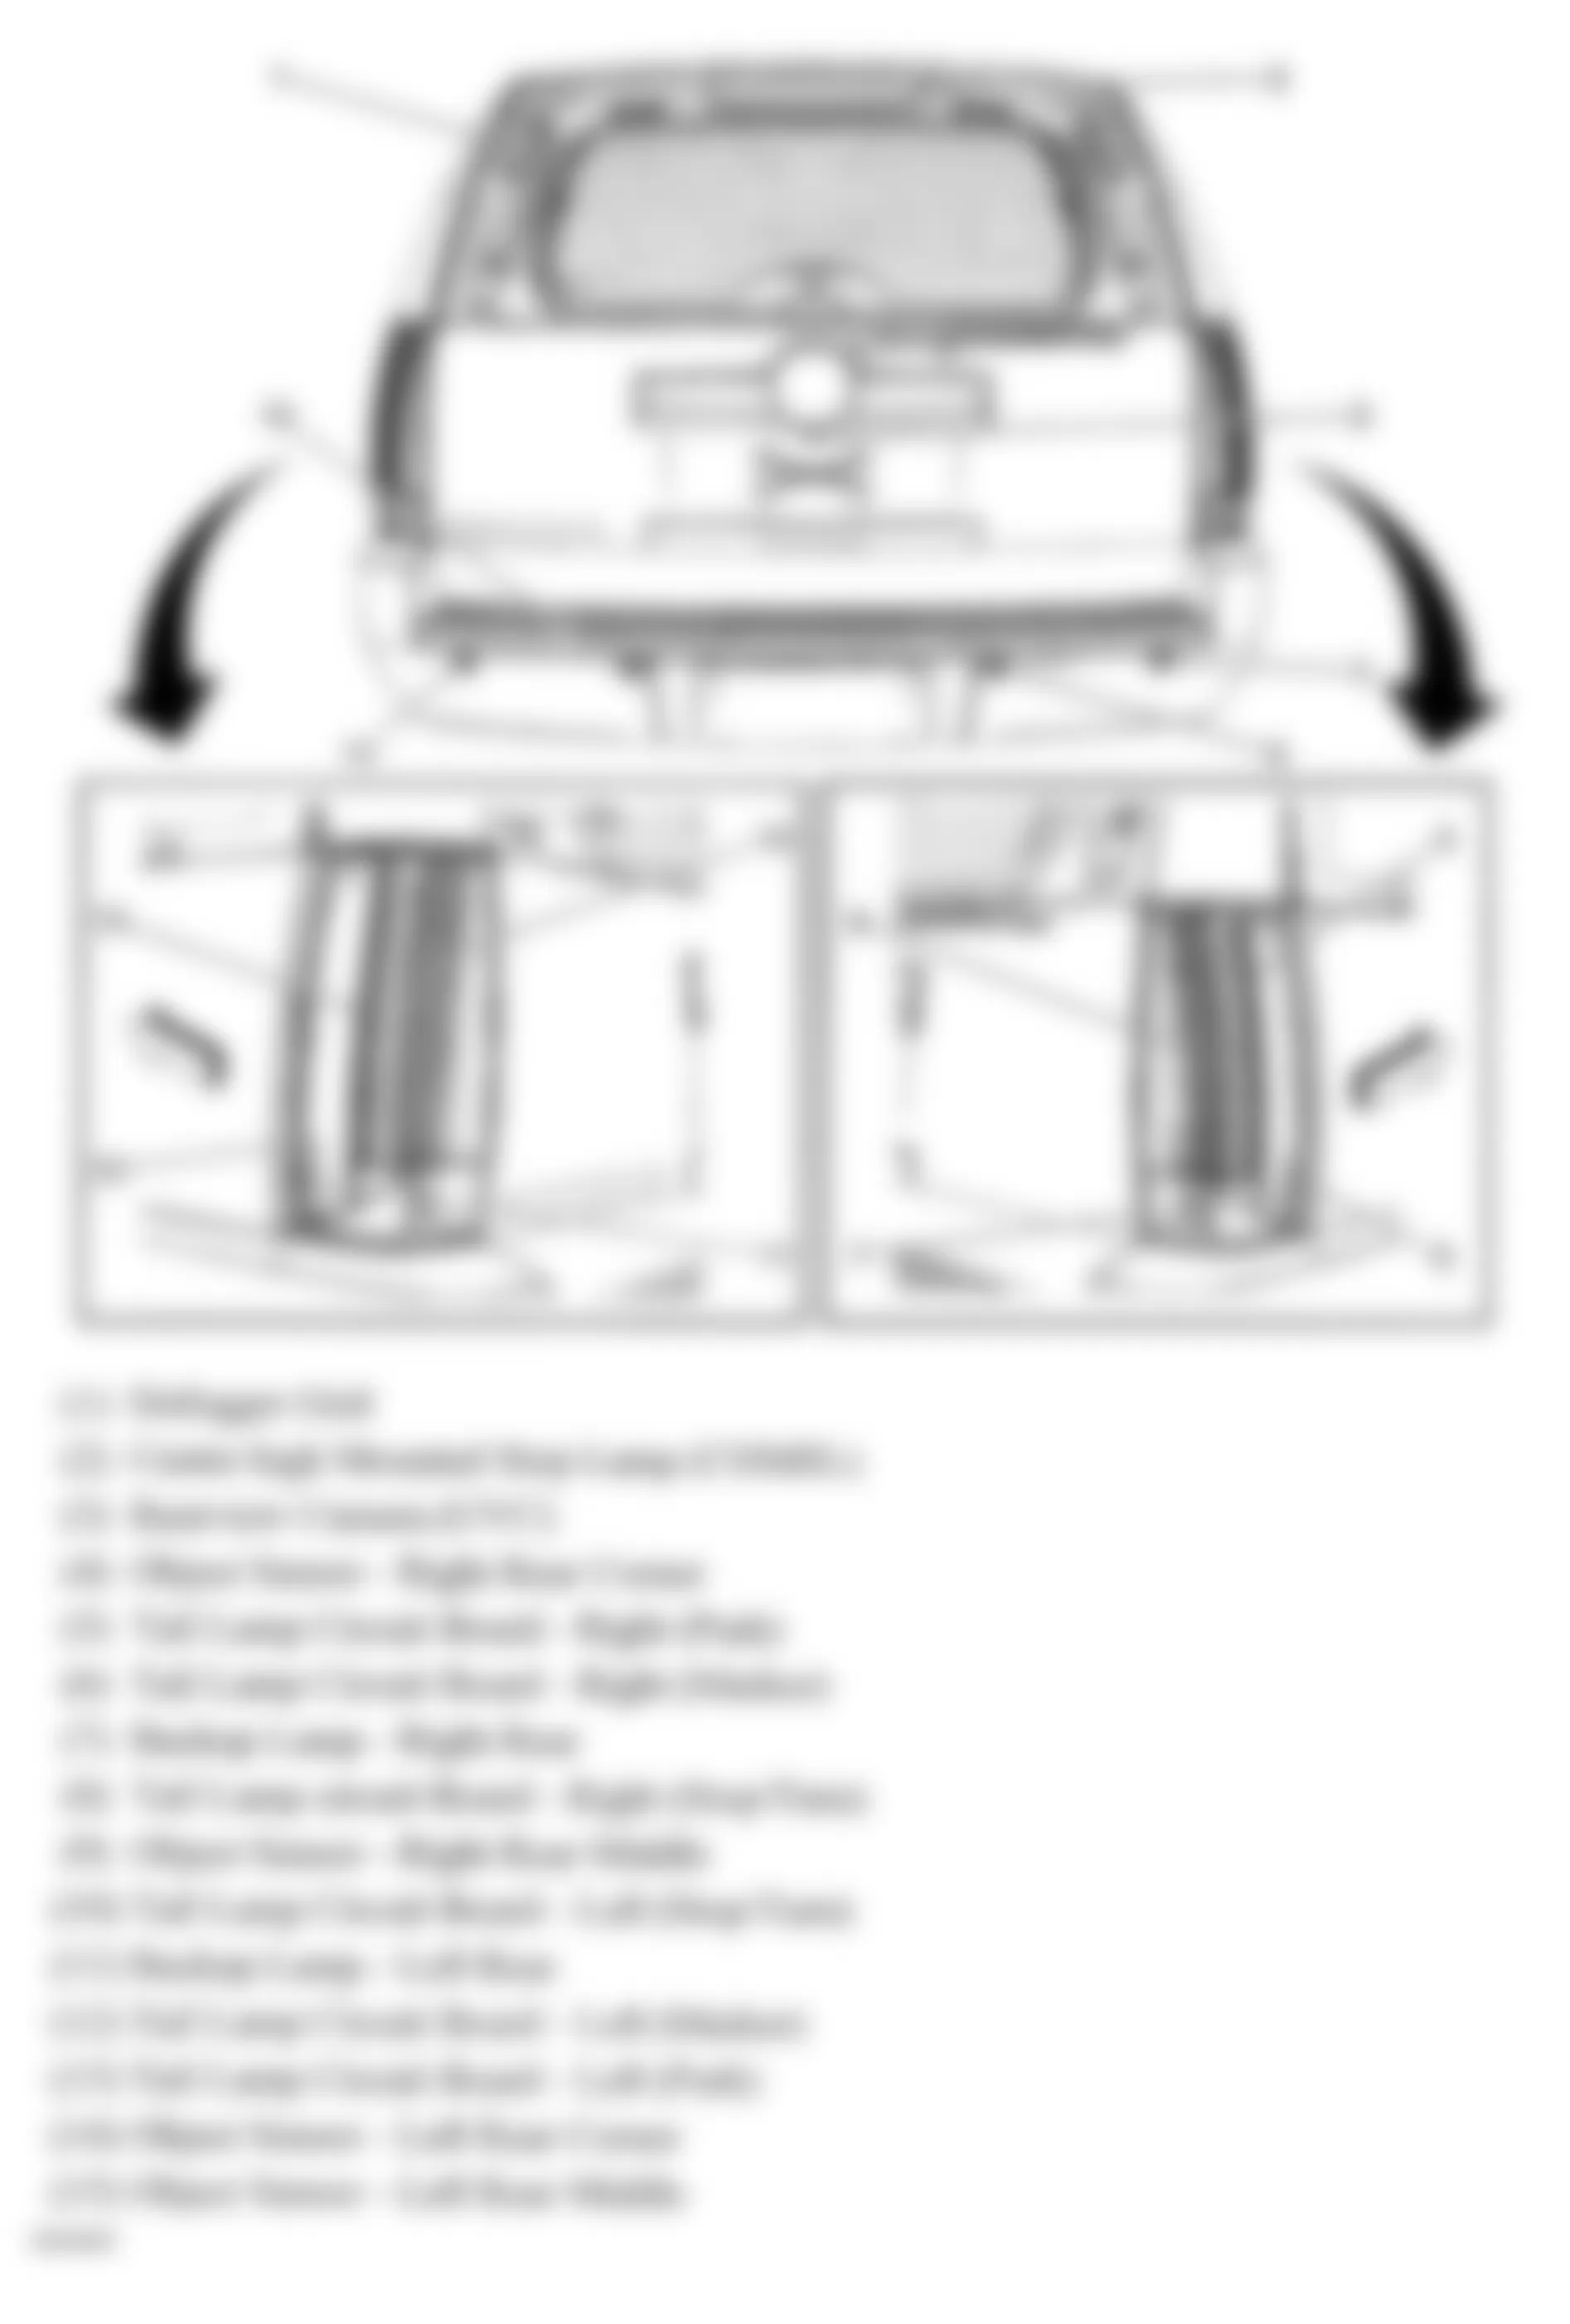 GMC Yukon XL C1500 2009 - Component Locations -  Rear Of Vehicle (Tahoe & Escalade W/One Piece Liftgate)